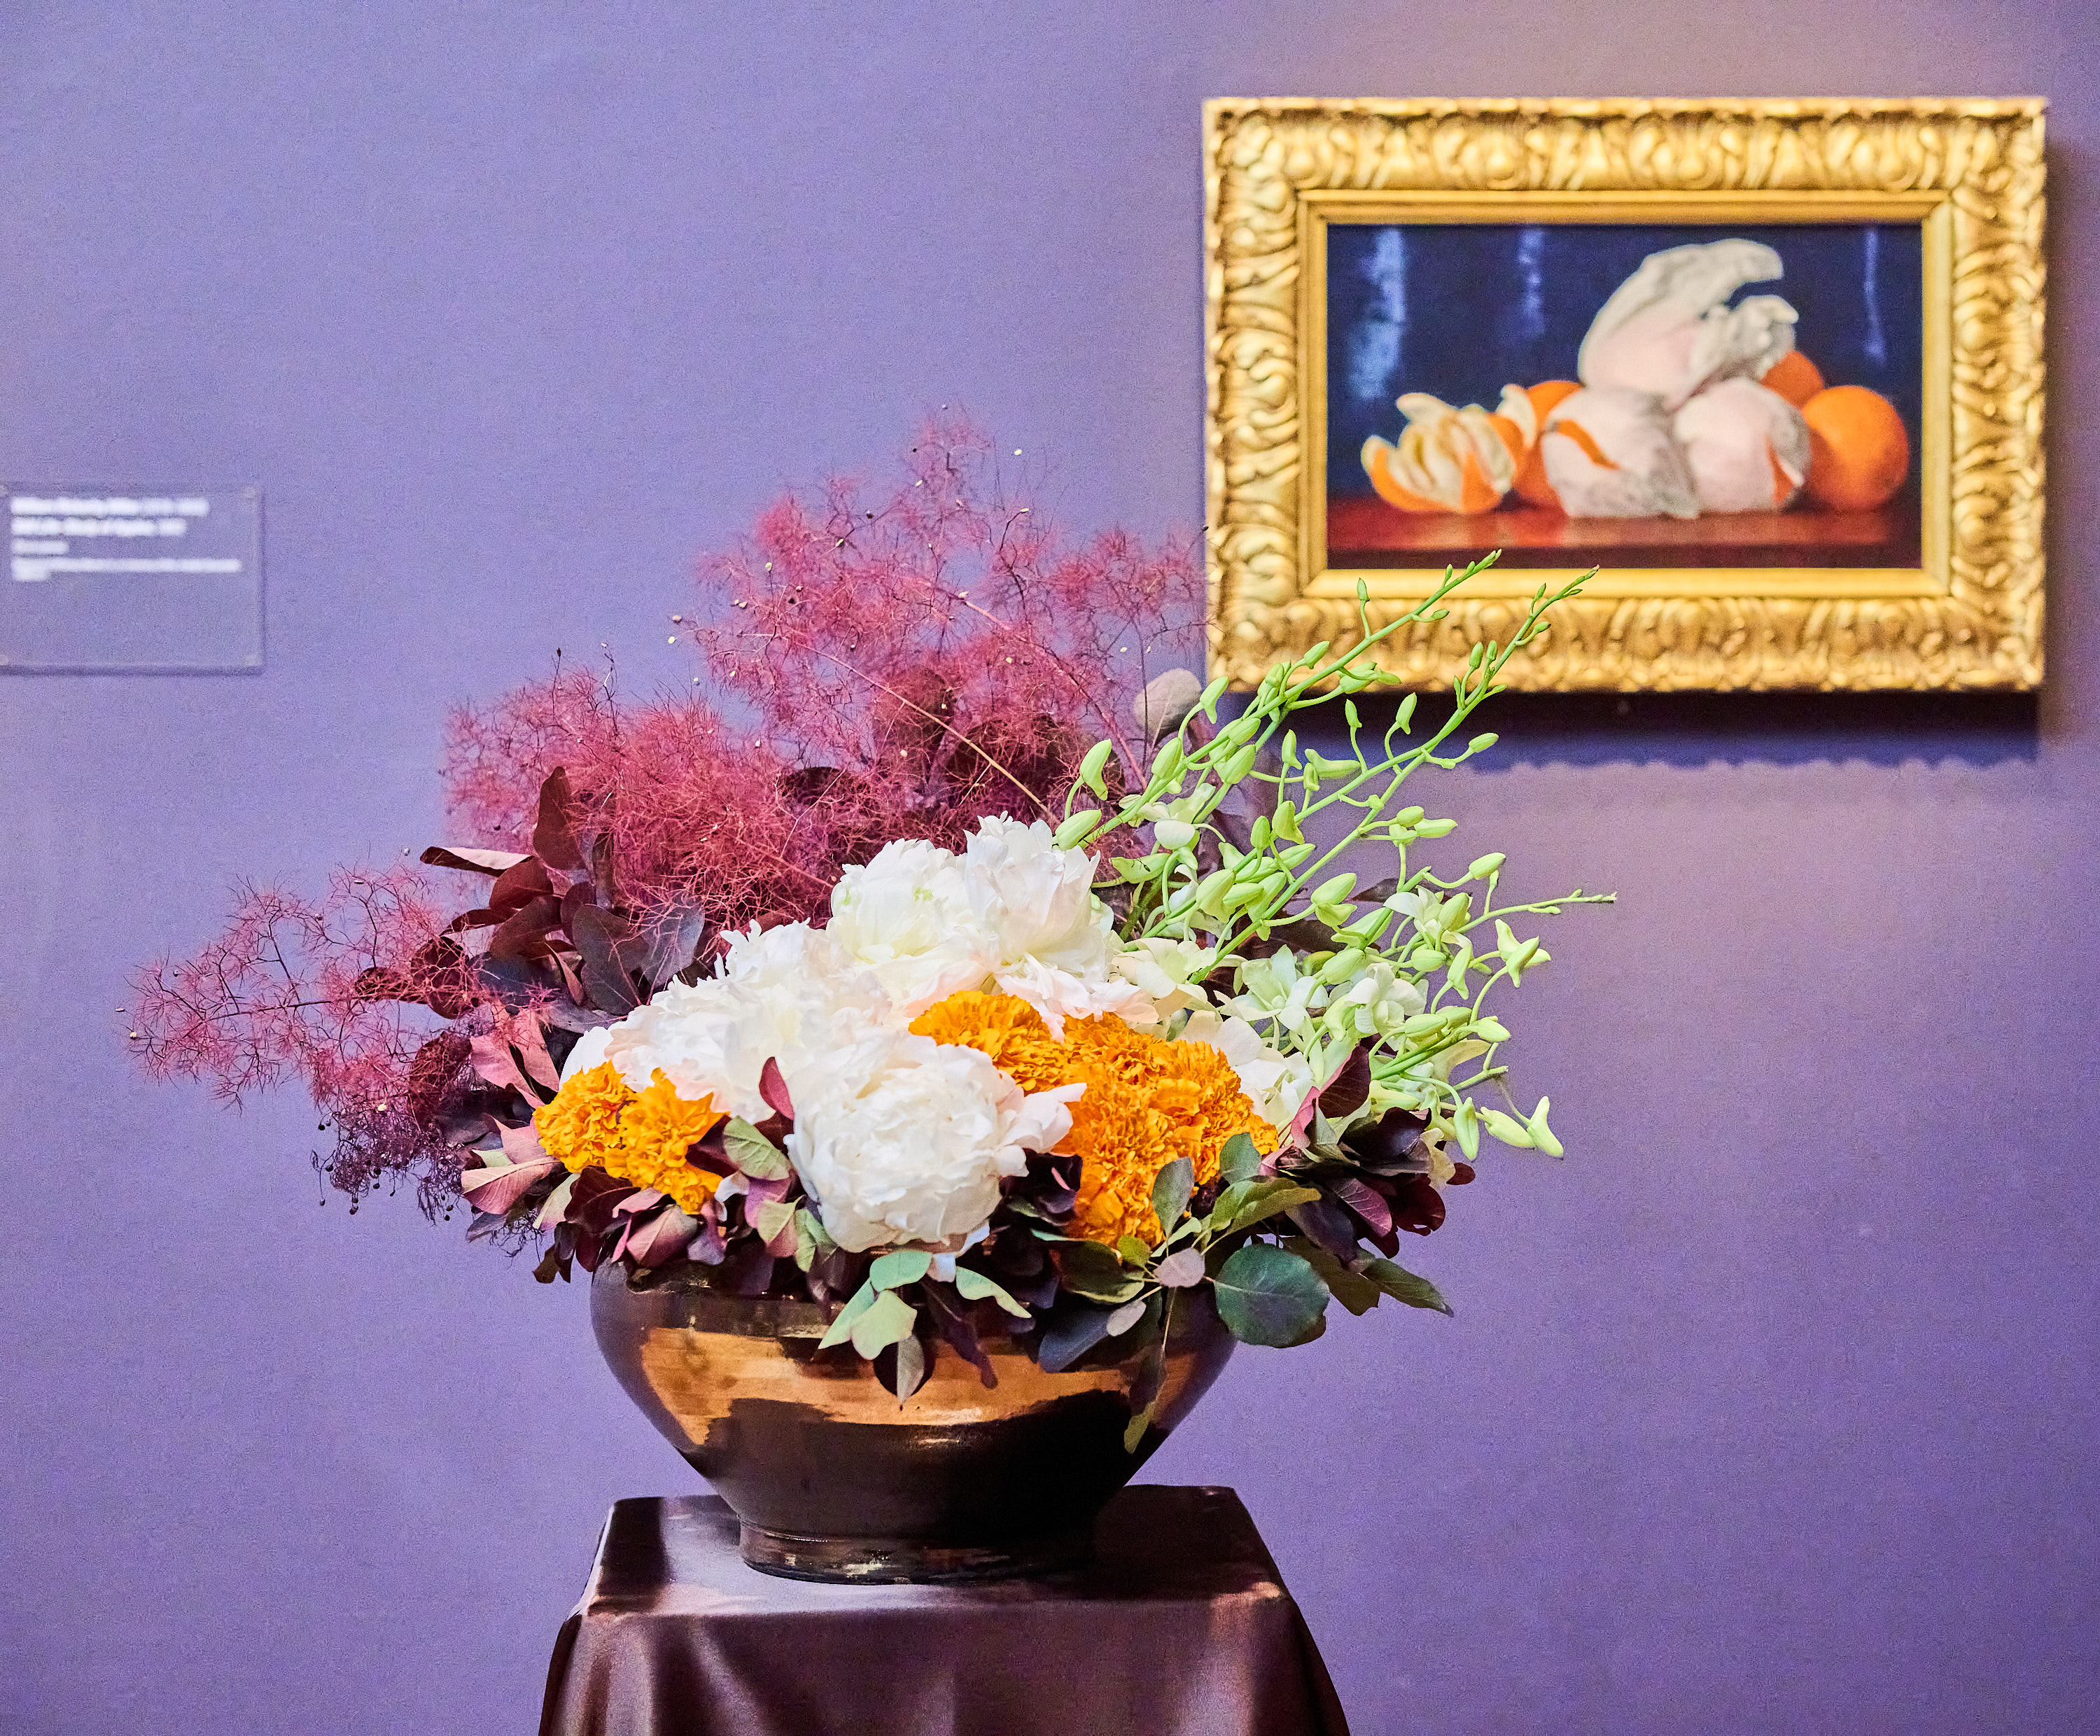 A vase with white, orange, and red flowers sits on a table with a dark cloth. A framed still-life painting of fruits hangs on the purple wall behind it.